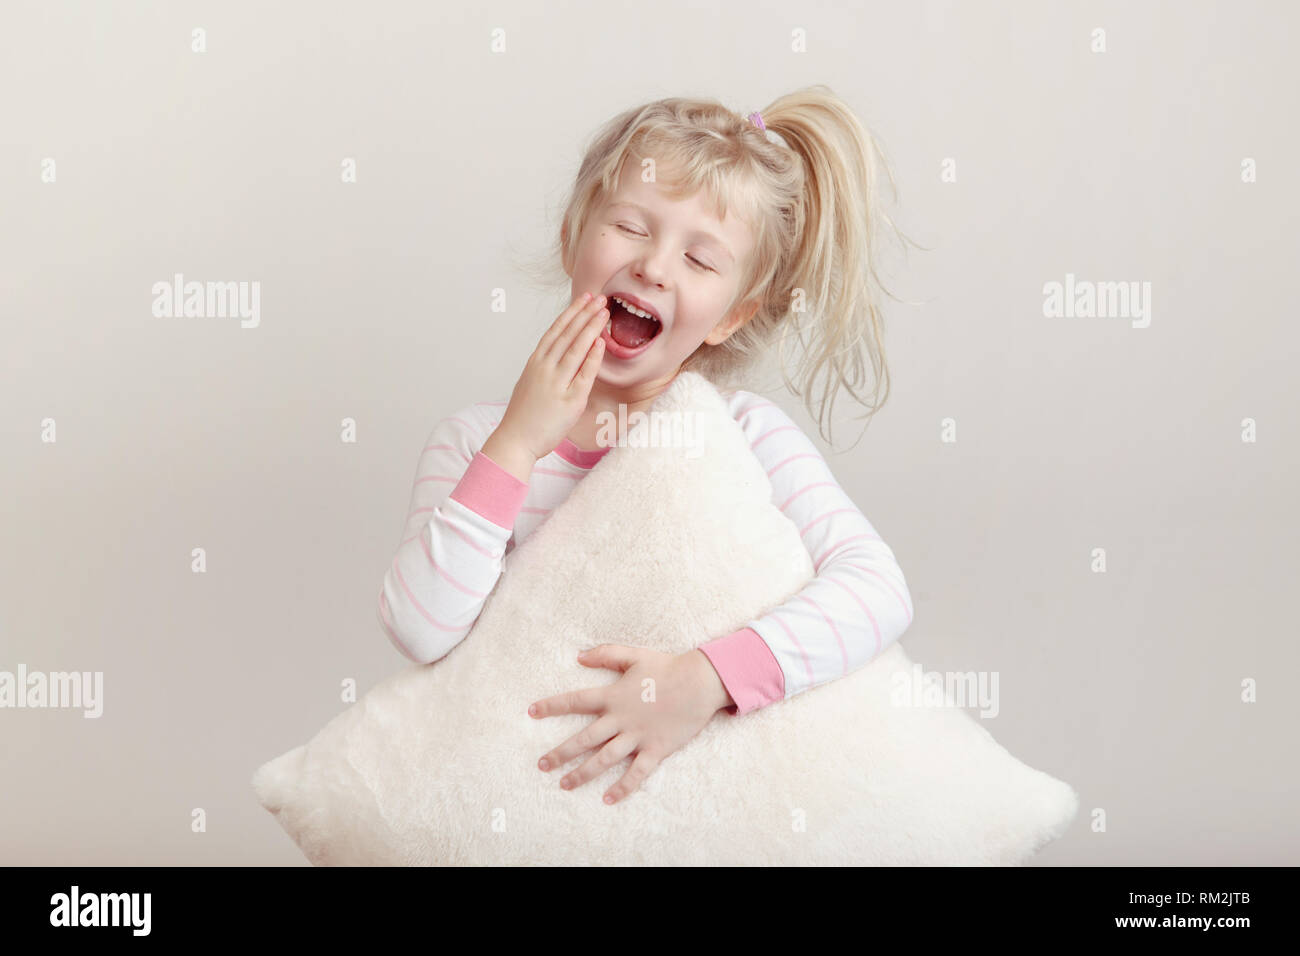 Healthy sleep concept. Cute blonde Caucasian girl child in pink pajamas with closed eyes yawning covering wide open mouth with palm. Sleepy kid with m Stock Photo